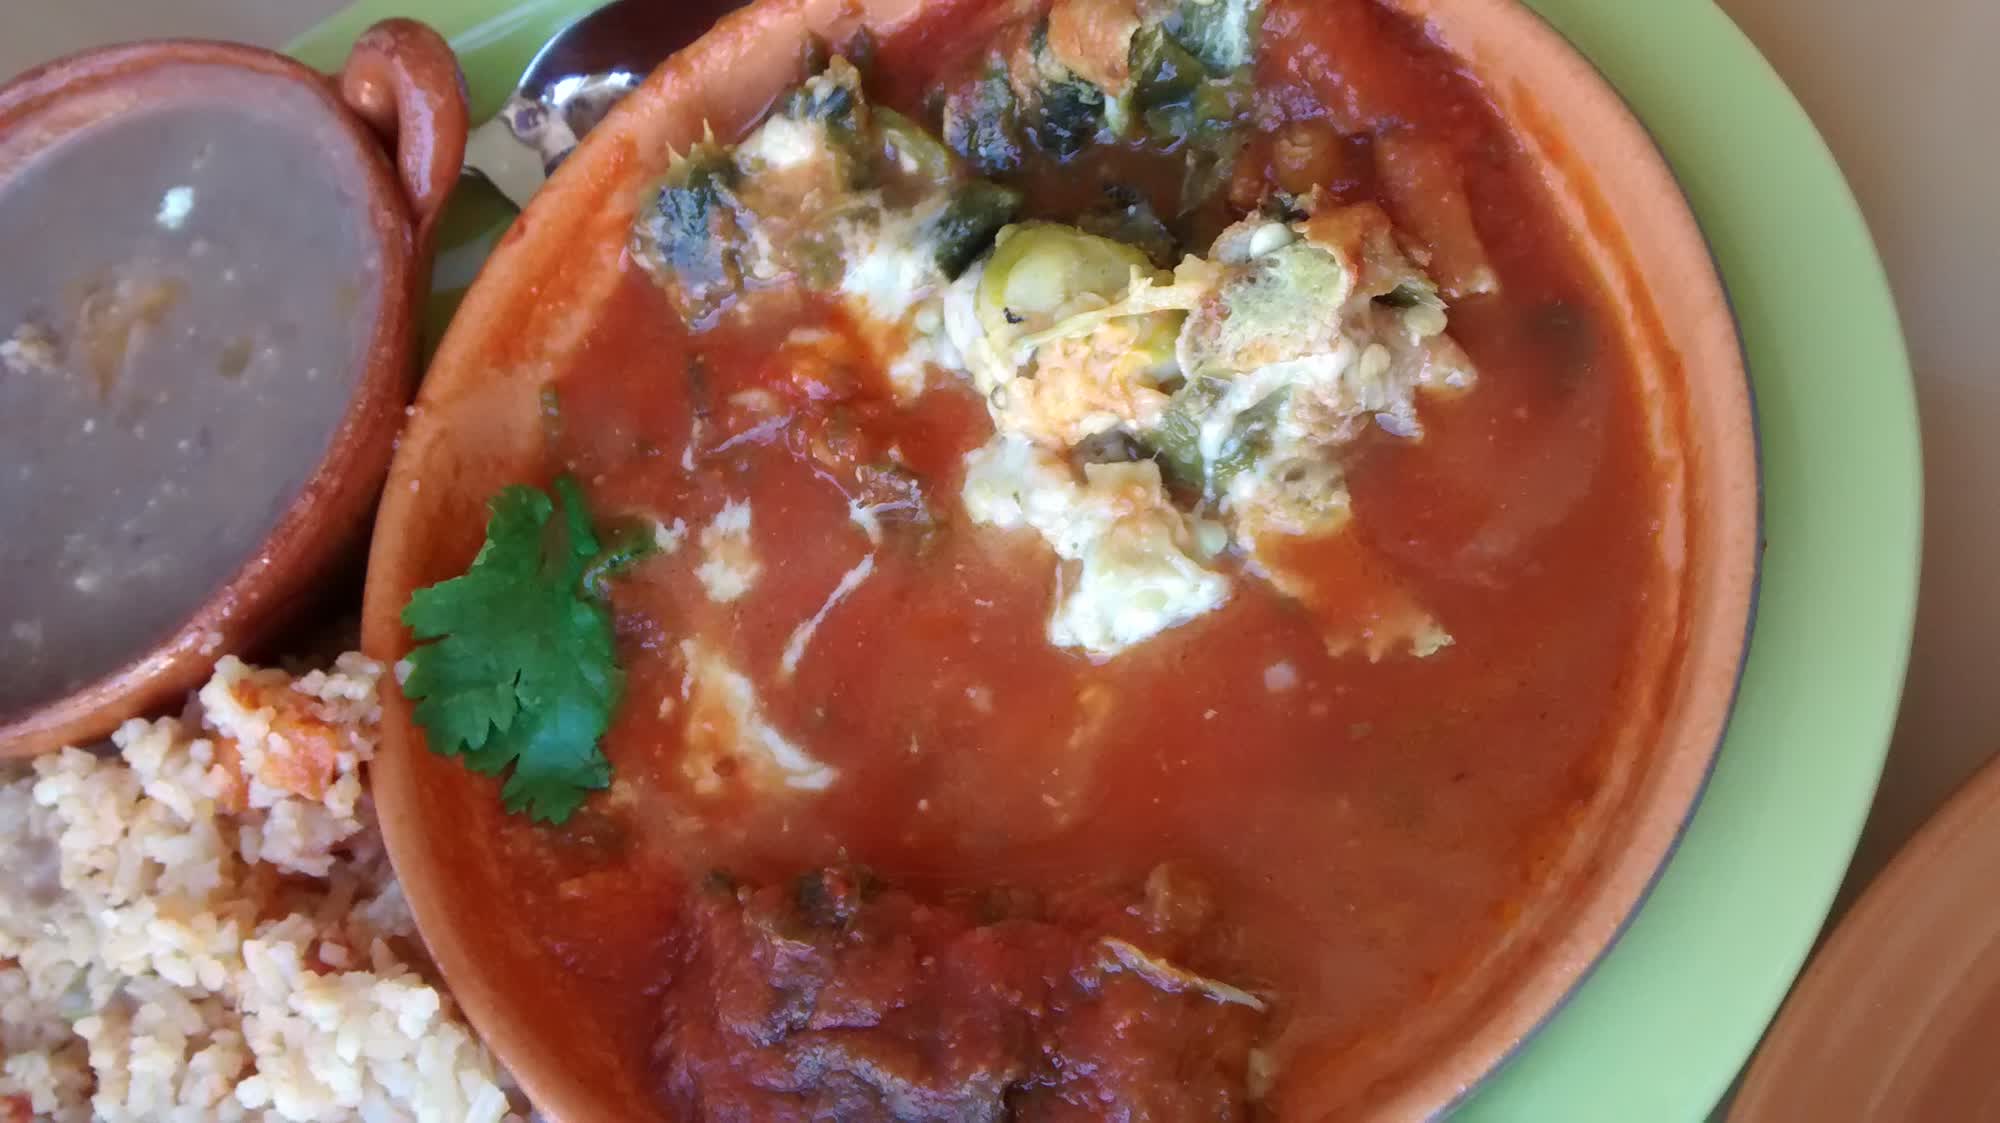 Baked poblano stuffed with cheese Mexican meal.